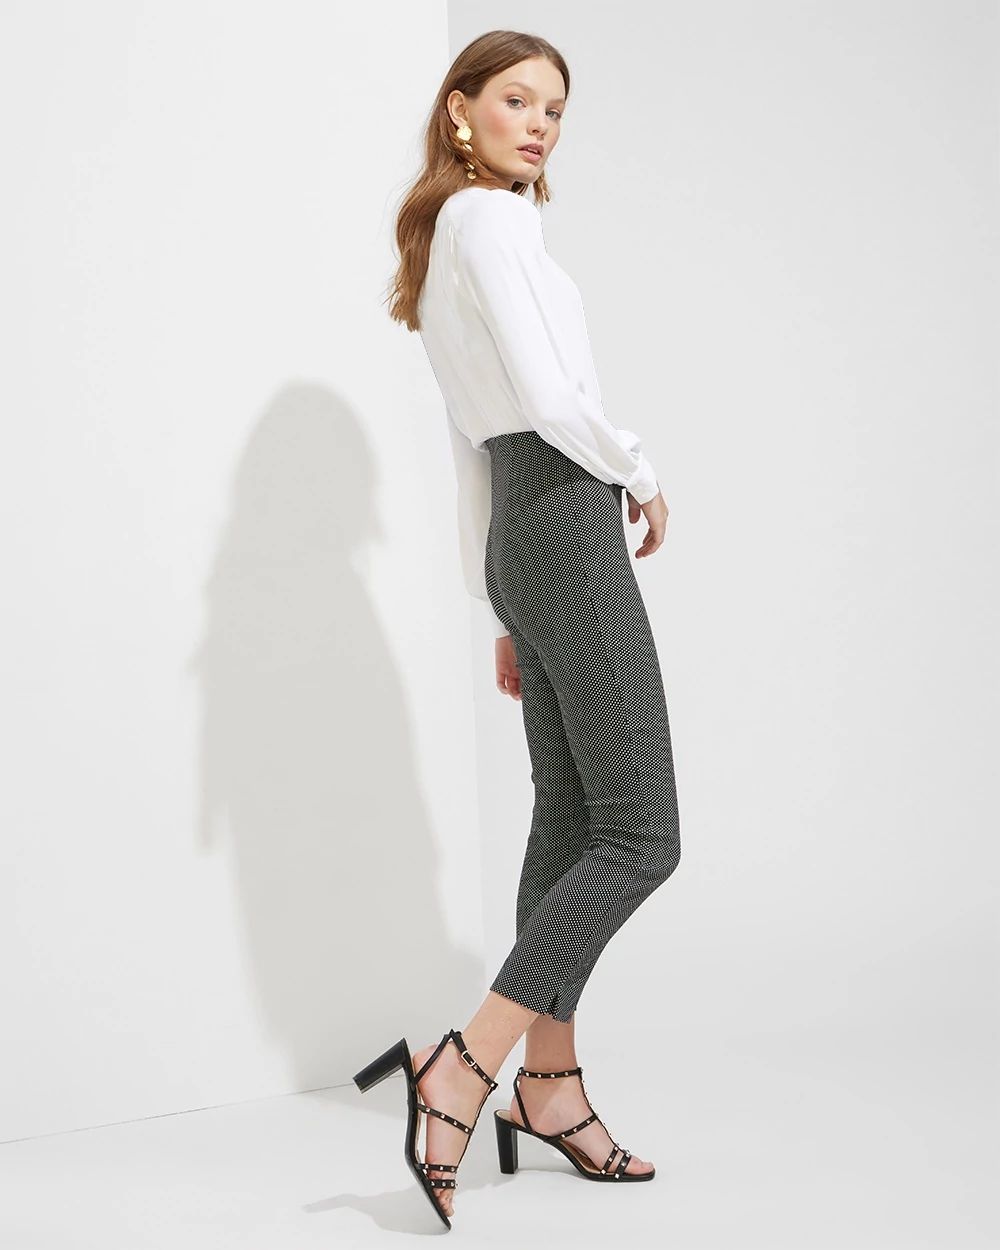 Outlet WHBM Pull-On Crop Pants click to view larger image.